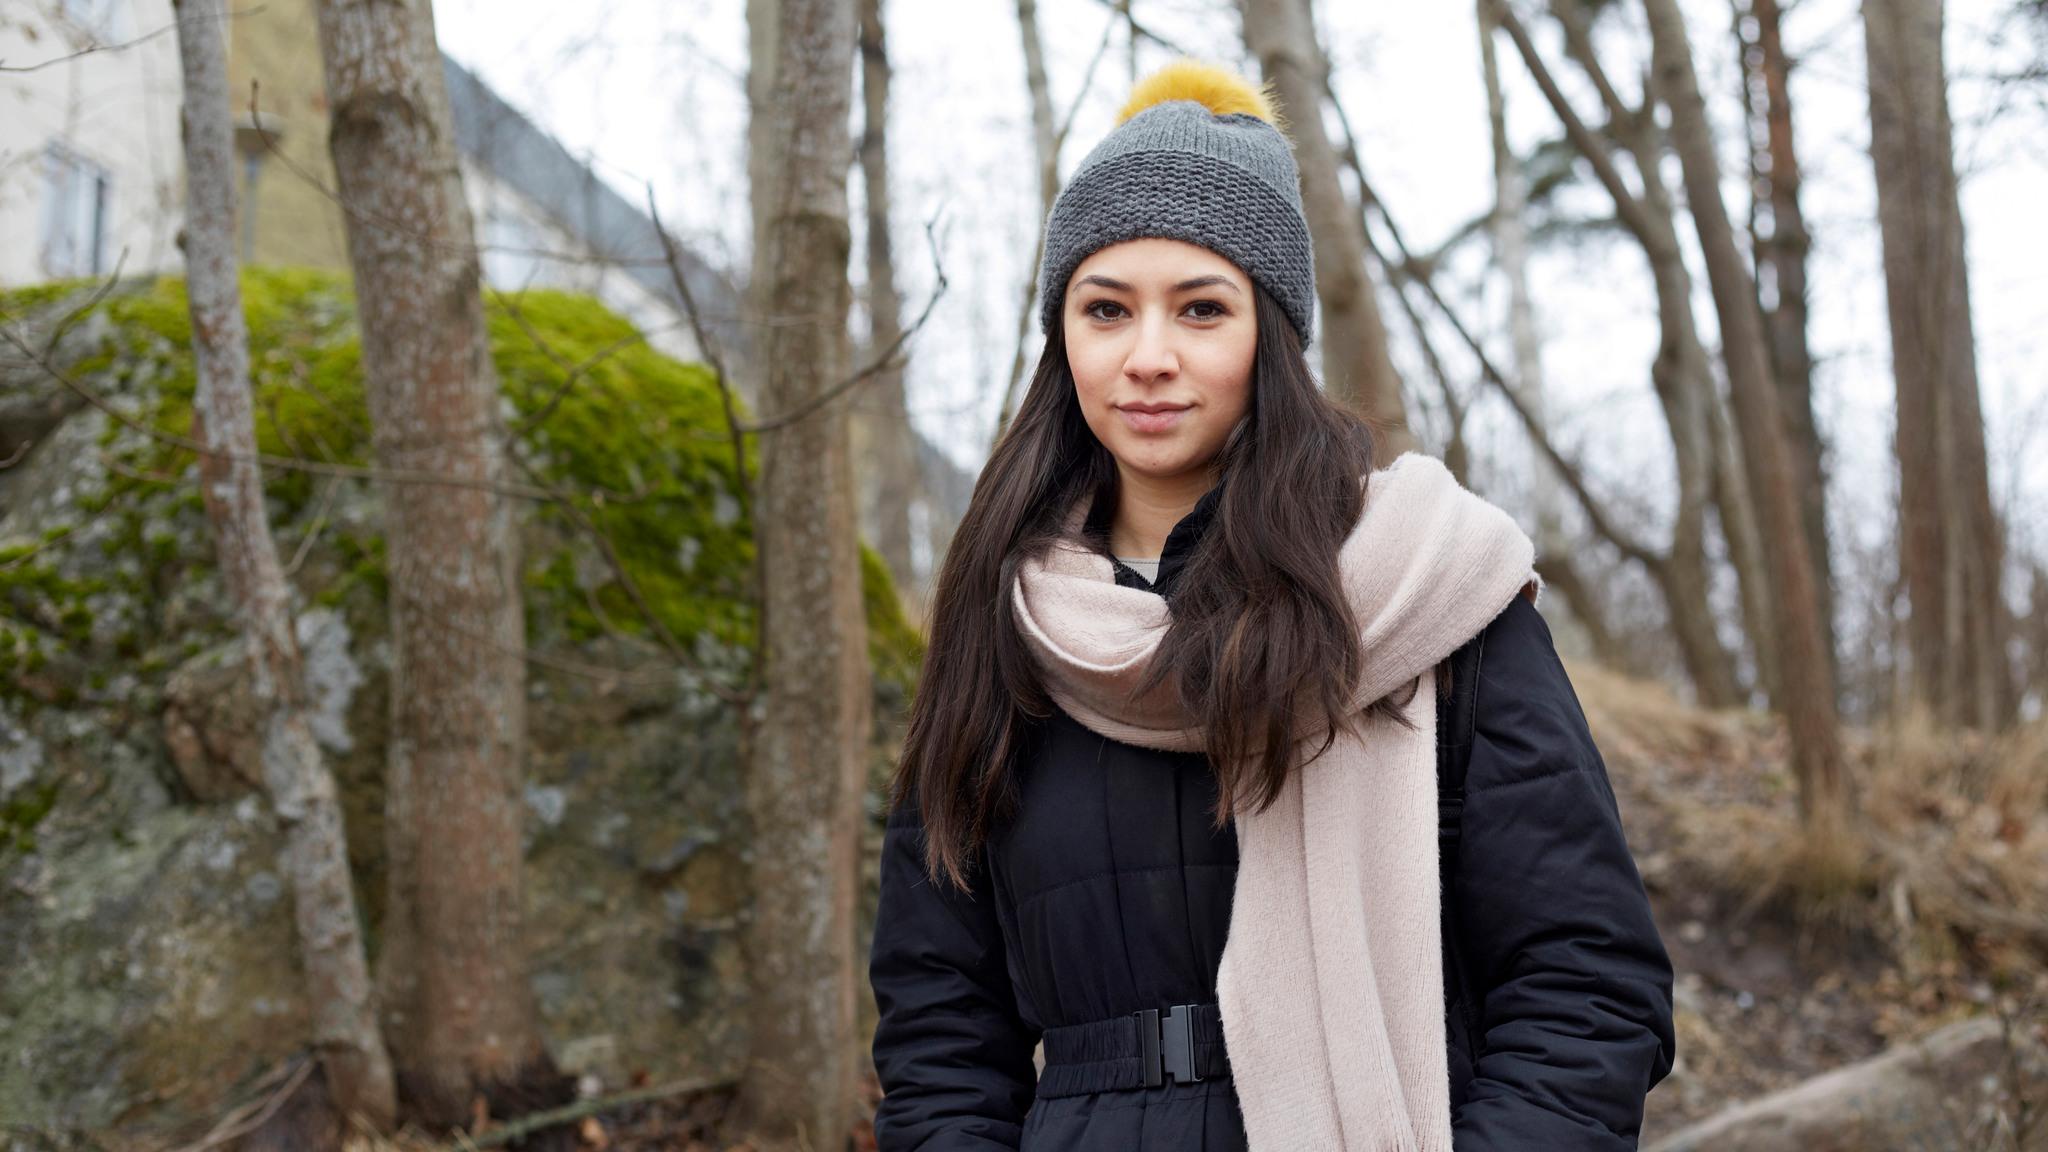 Outdoor portrait of Zelga Gabriel with long dark hair, wearing a black winter jacket and a grey woolly hat, trees in the background.